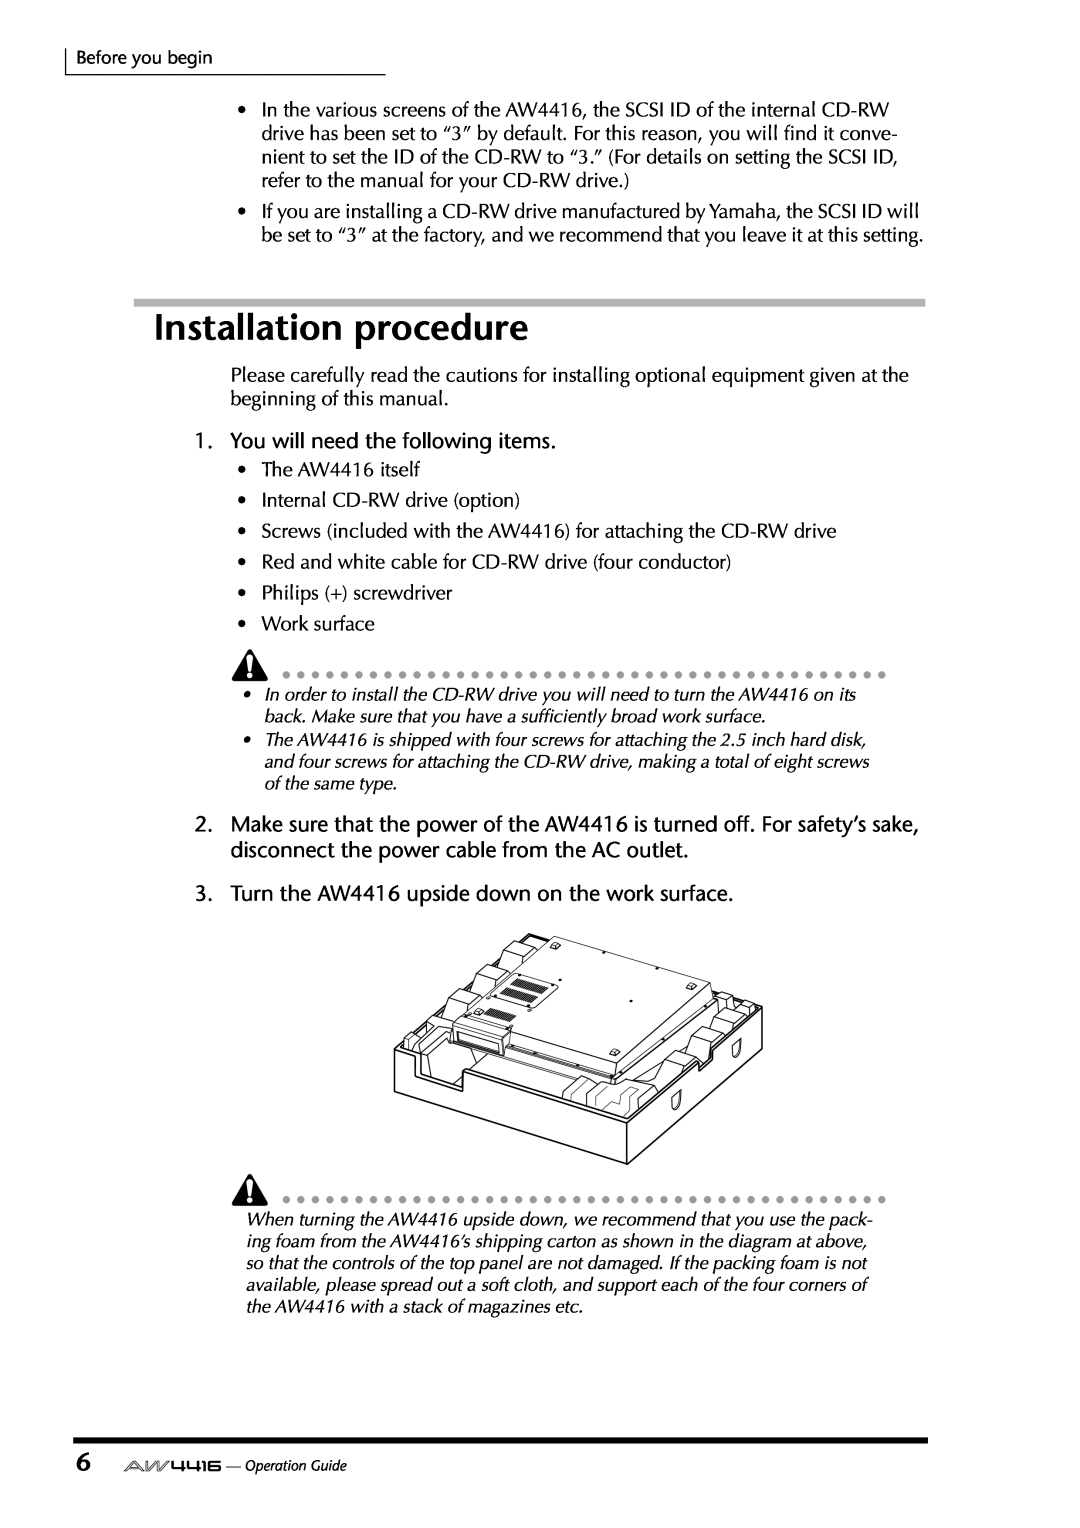 Yamaha manual Installation procedure, You will need the following items, Turn the AW4416 upside down on the work surface 